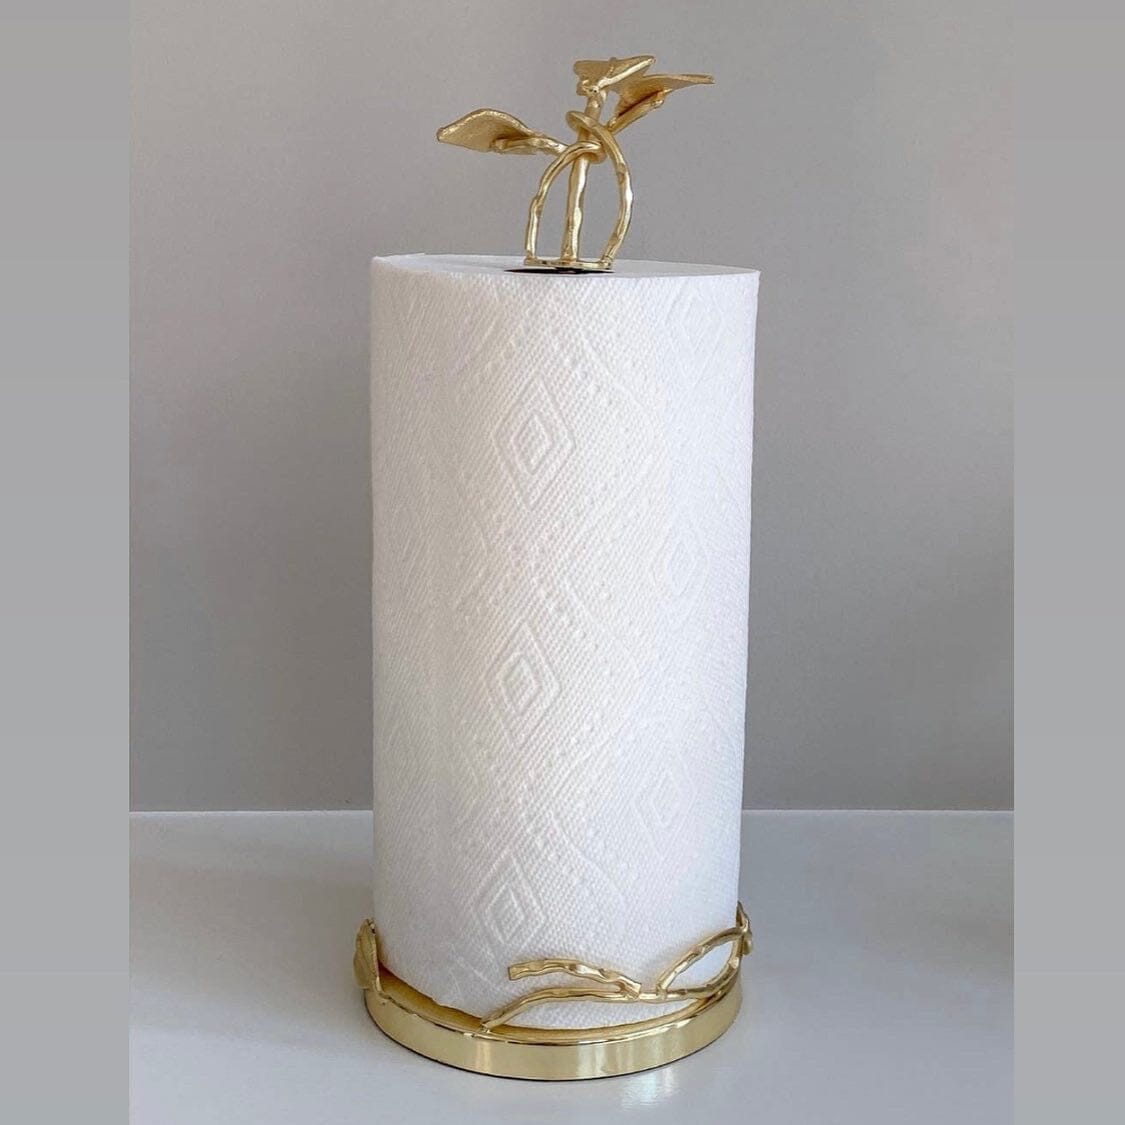 Stainless Steel Paper Towel Holder with Gold Leaf Design Kitchen roll holder High Class Touch - Home Decor 